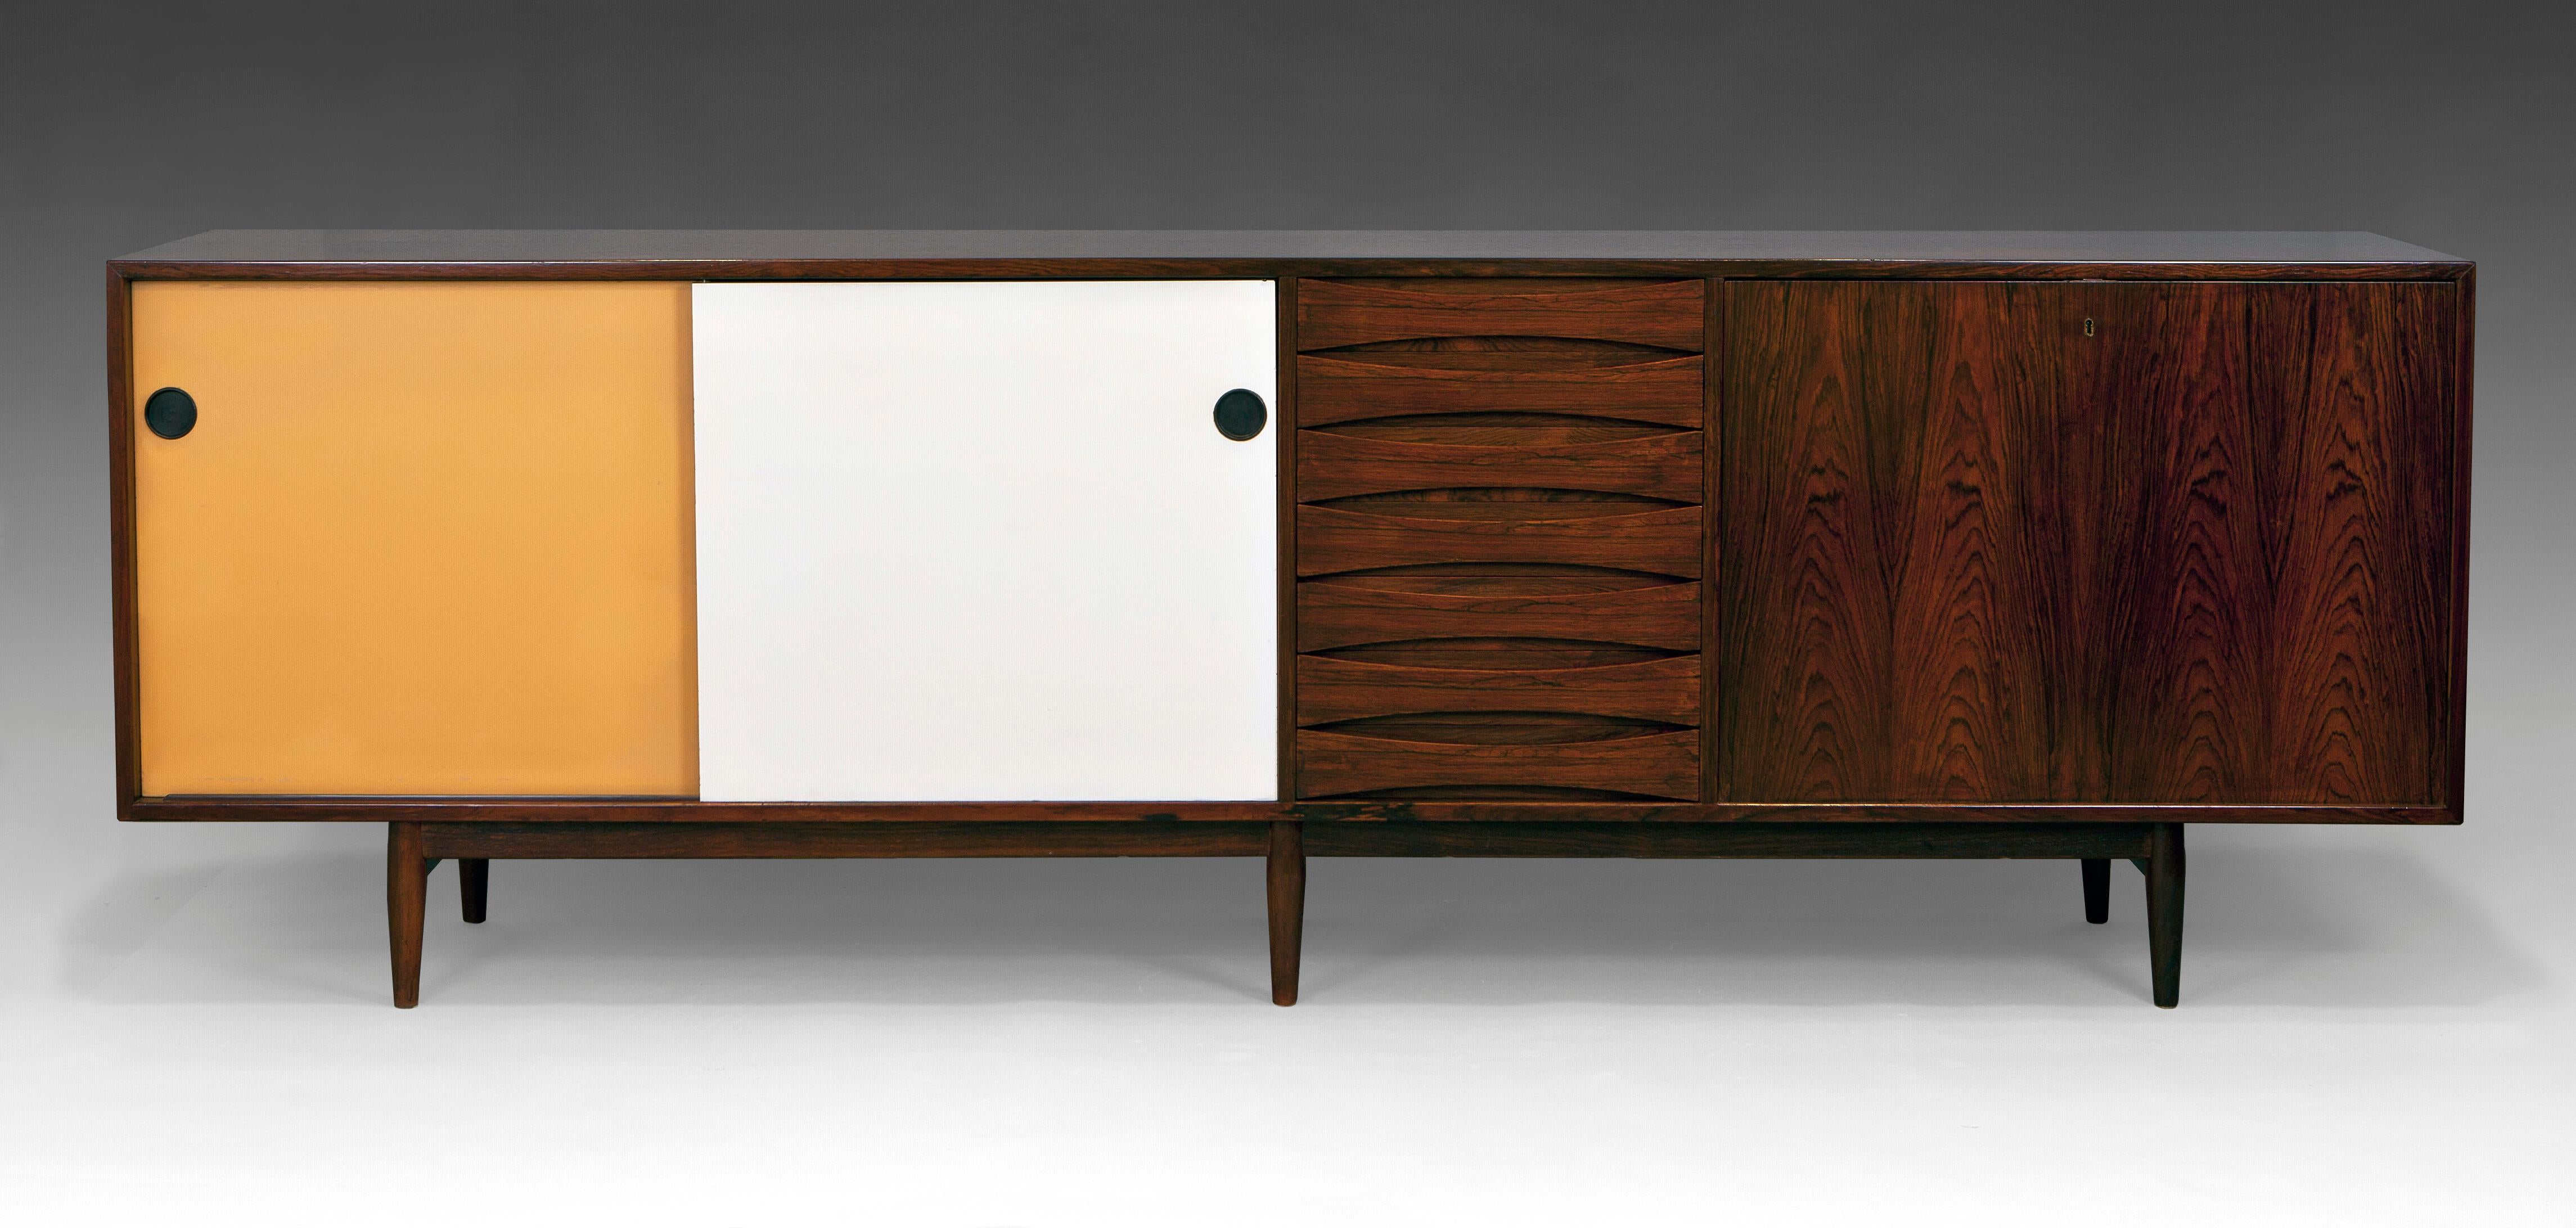 Rosewood “29 A” Sideboard by Arne Vodder for Sibast. Denmark, late 1950s. Freestanding rosewood sideboard on six legs. Front with two sliding doors painted in white and ocher. Central section with seven drawers with curved handles. Bar section with